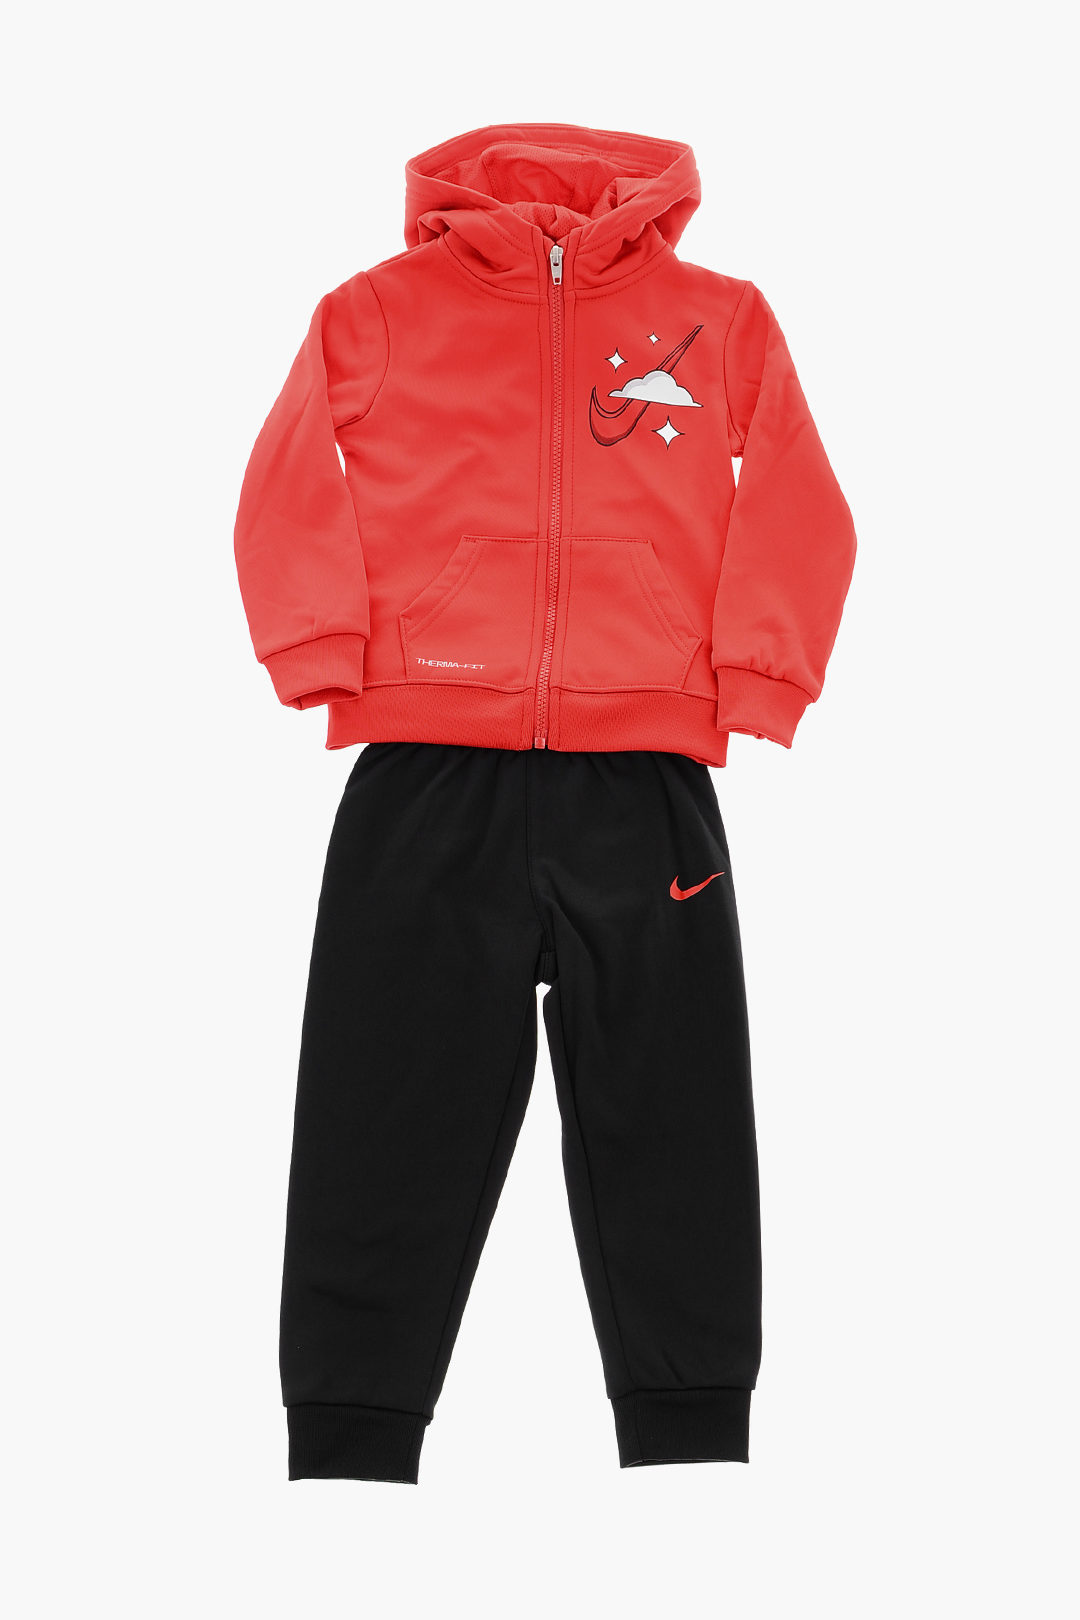 Nike KIDS ThermaFit Hoodie and Joggers ALL DAY PLAY Set boys - Glamood  Outlet